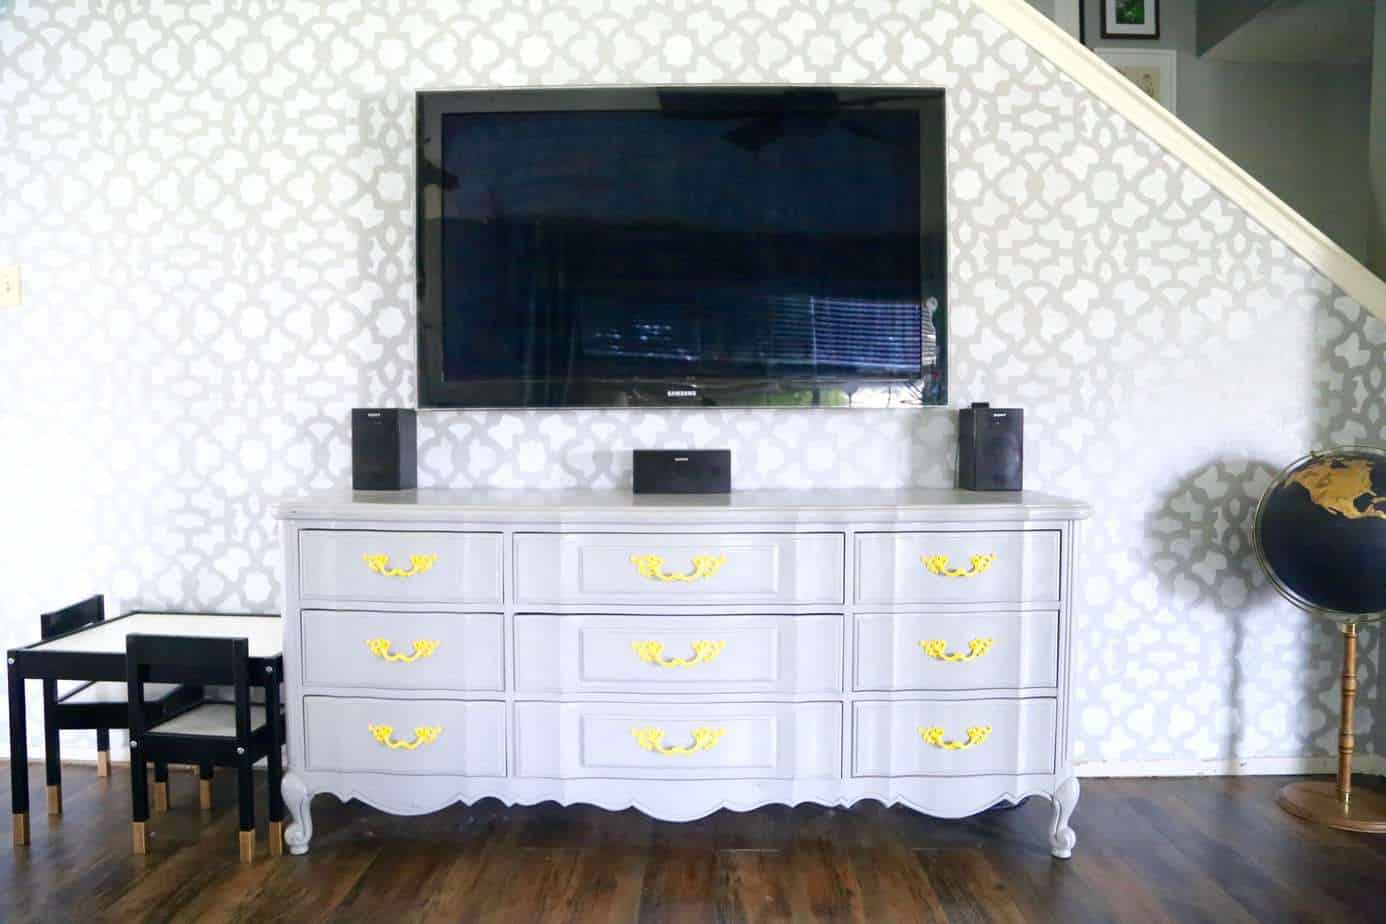 How to Turn a Dresser Into a DIY TV Stand